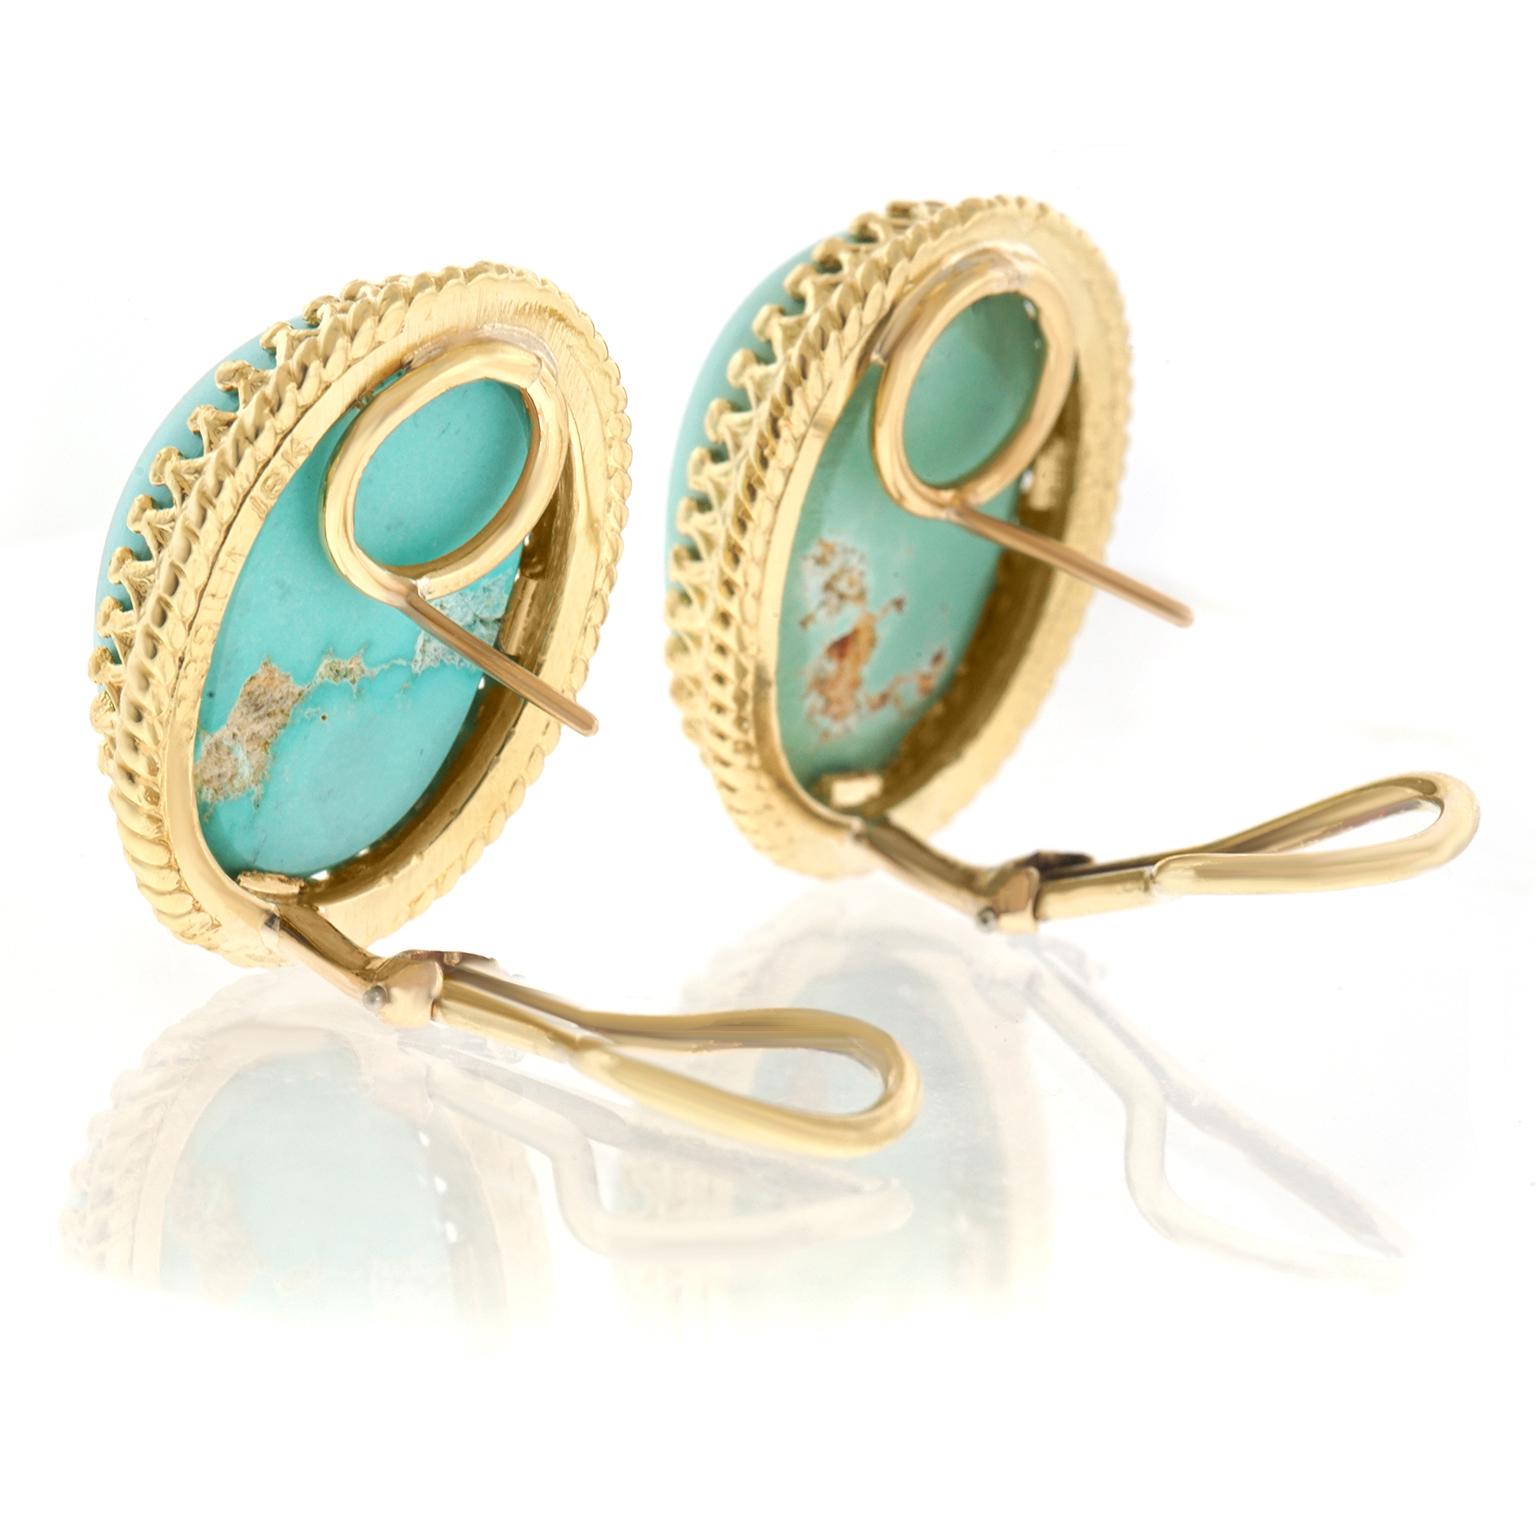 Cellino Persian Turquoise-Set Gold Earrings 2